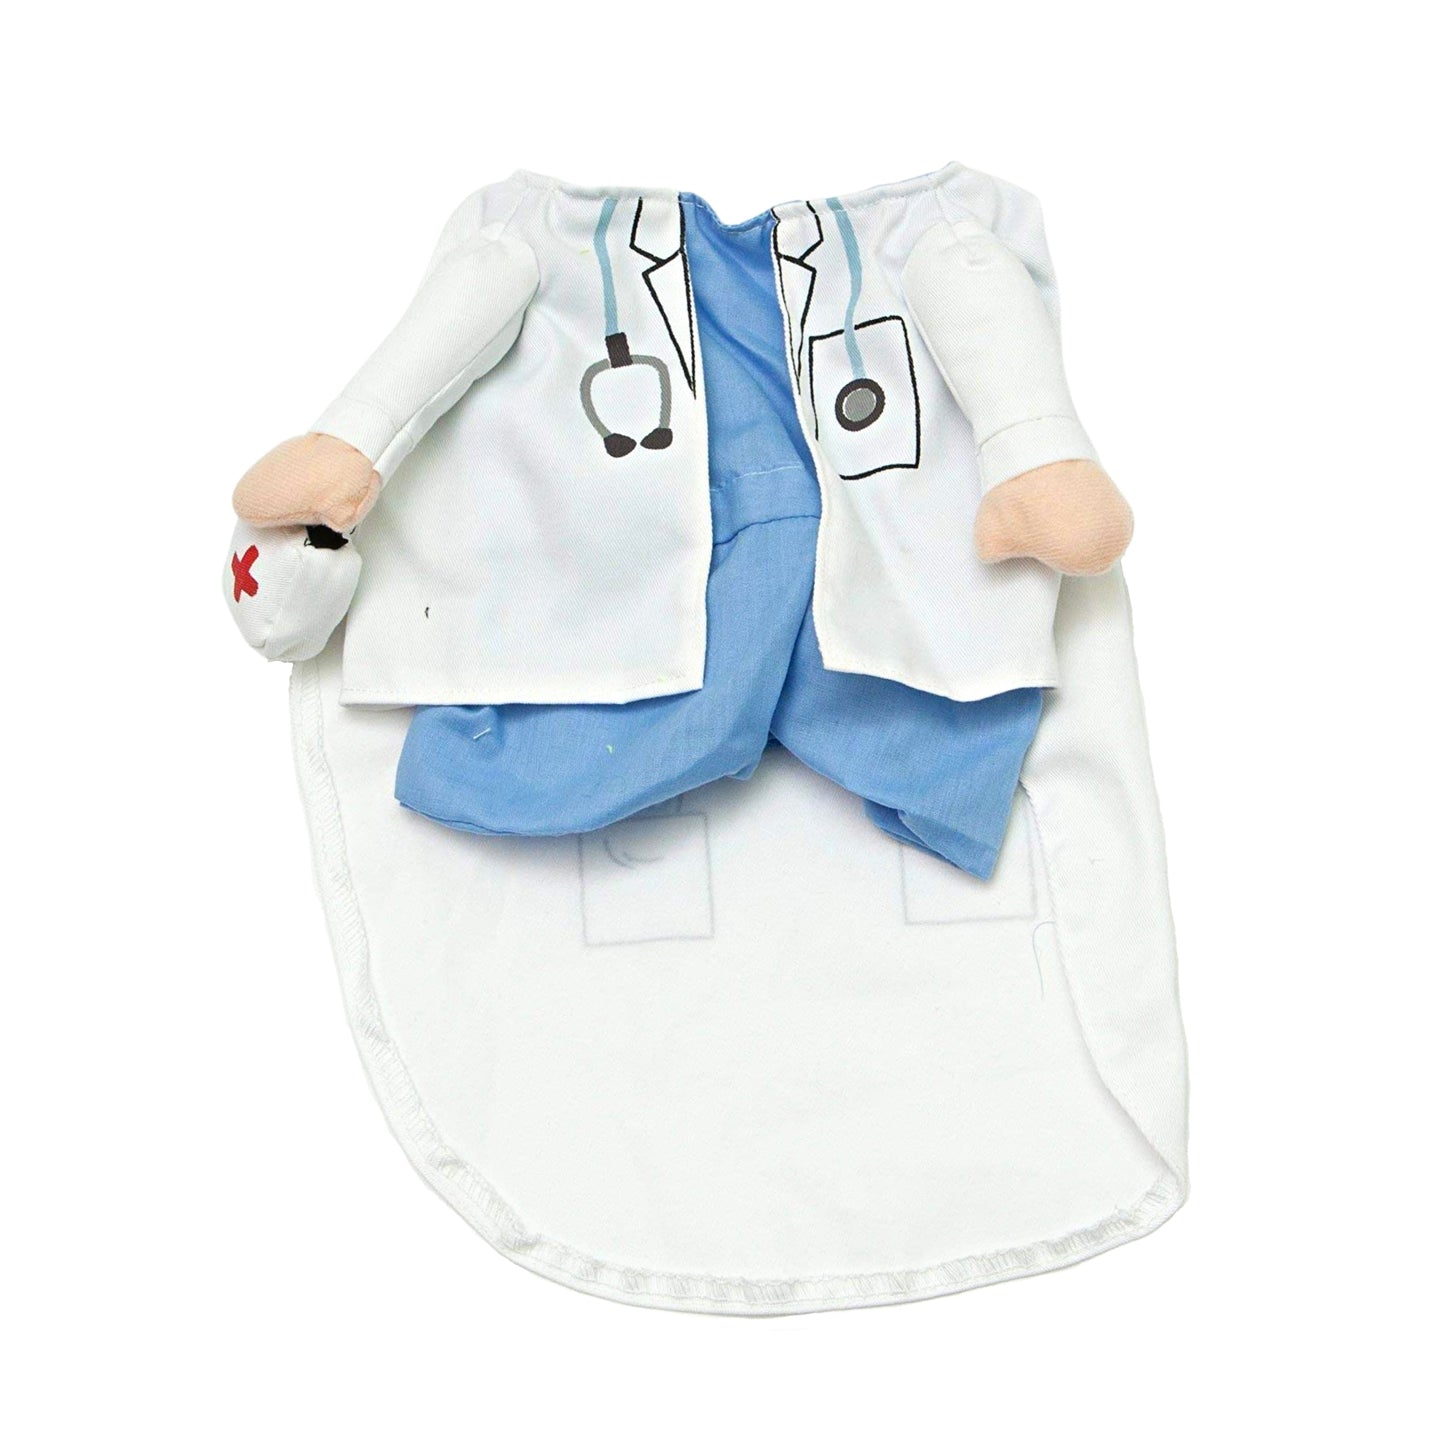 Midlee Fake Doctor Arms Costume for Small Dogs (Small)